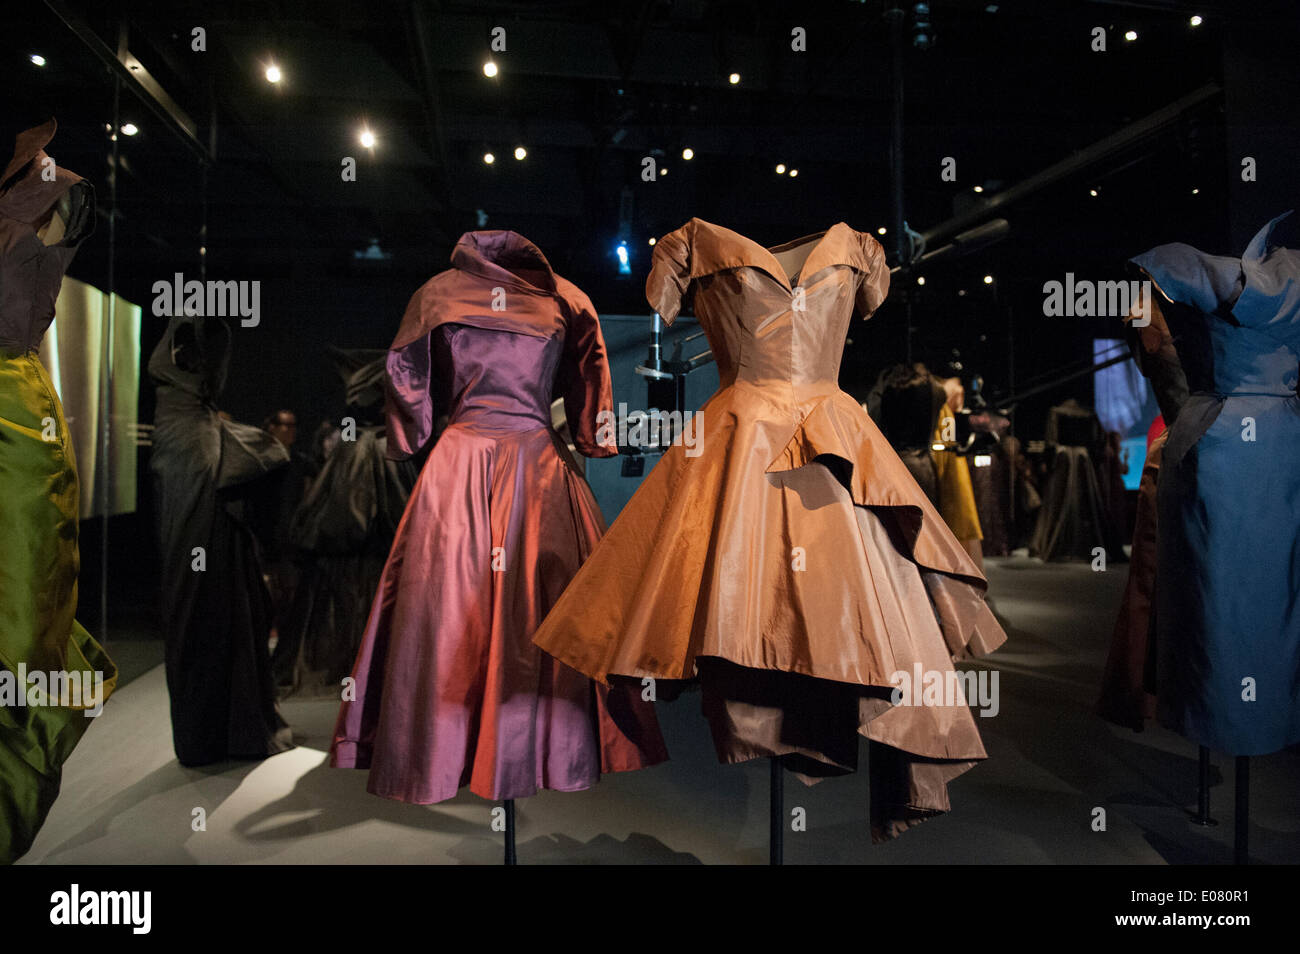 New York, USA. 5th May 2014. A show of the work of Charles James (1906-1978) opened the new Anna Wintour Costume Center at the Metropolitan Museum of Art in New York City. James was born in London, where he began his career as a designer. Then he moved to Paris, before moving to New York City. The Metropolitan Museum of Art has the most definitive body of James' work in the world. James is considered one of the greatest designers to have worked in the tradition of haute couture in America. Credit:  Terese Loeb Kreuzer/Alamy Live News Stock Photo